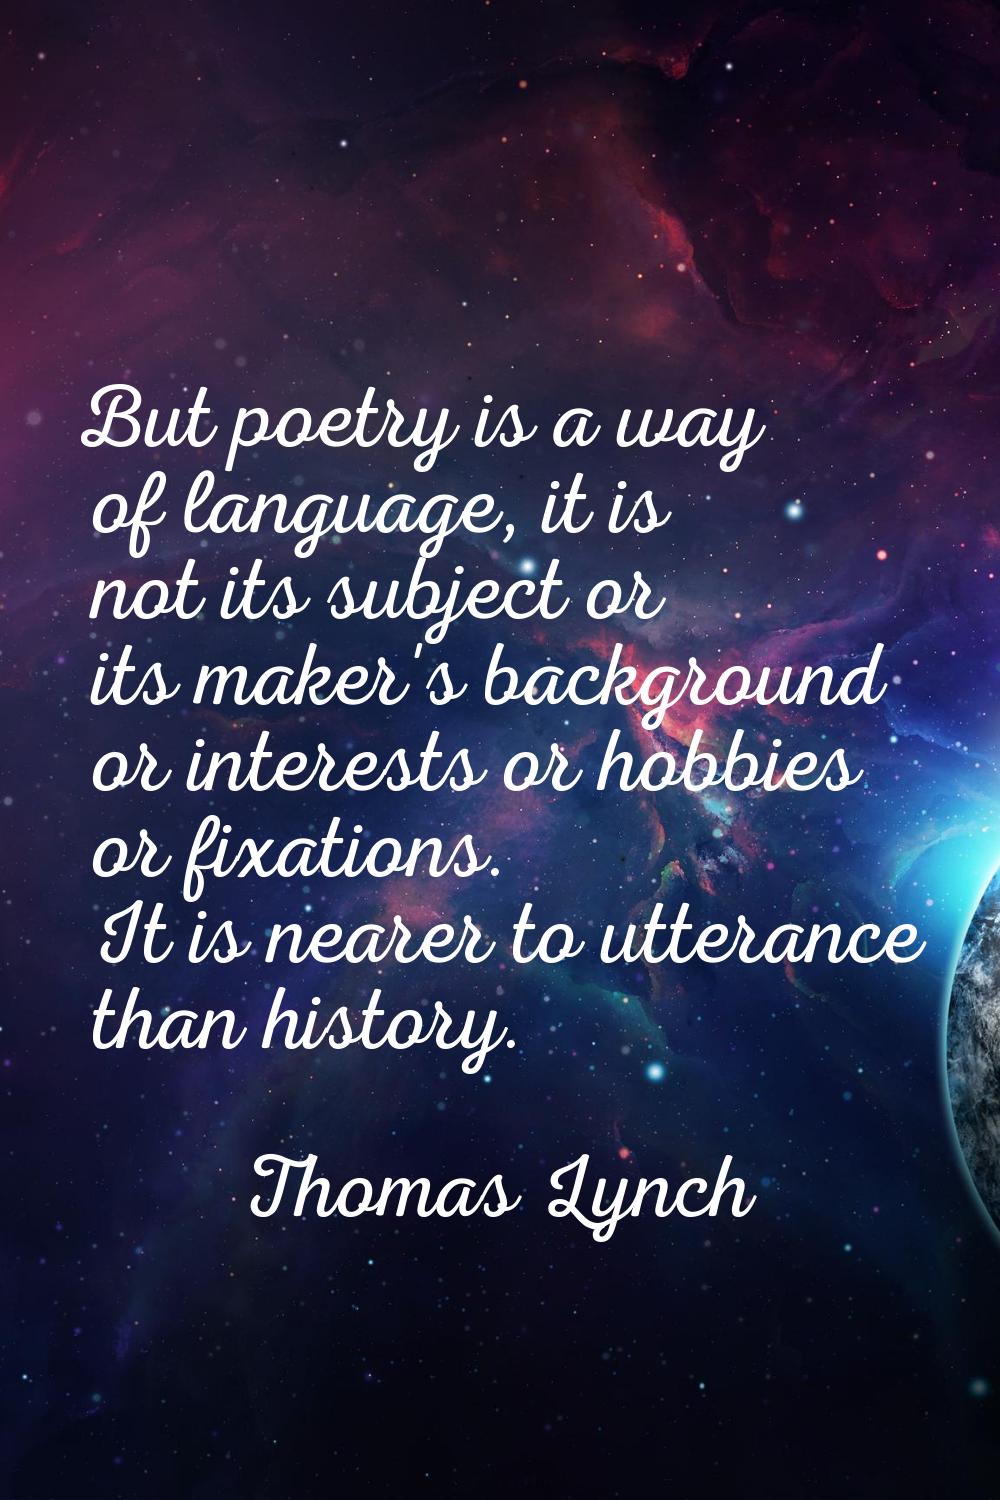 But poetry is a way of language, it is not its subject or its maker's background or interests or ho